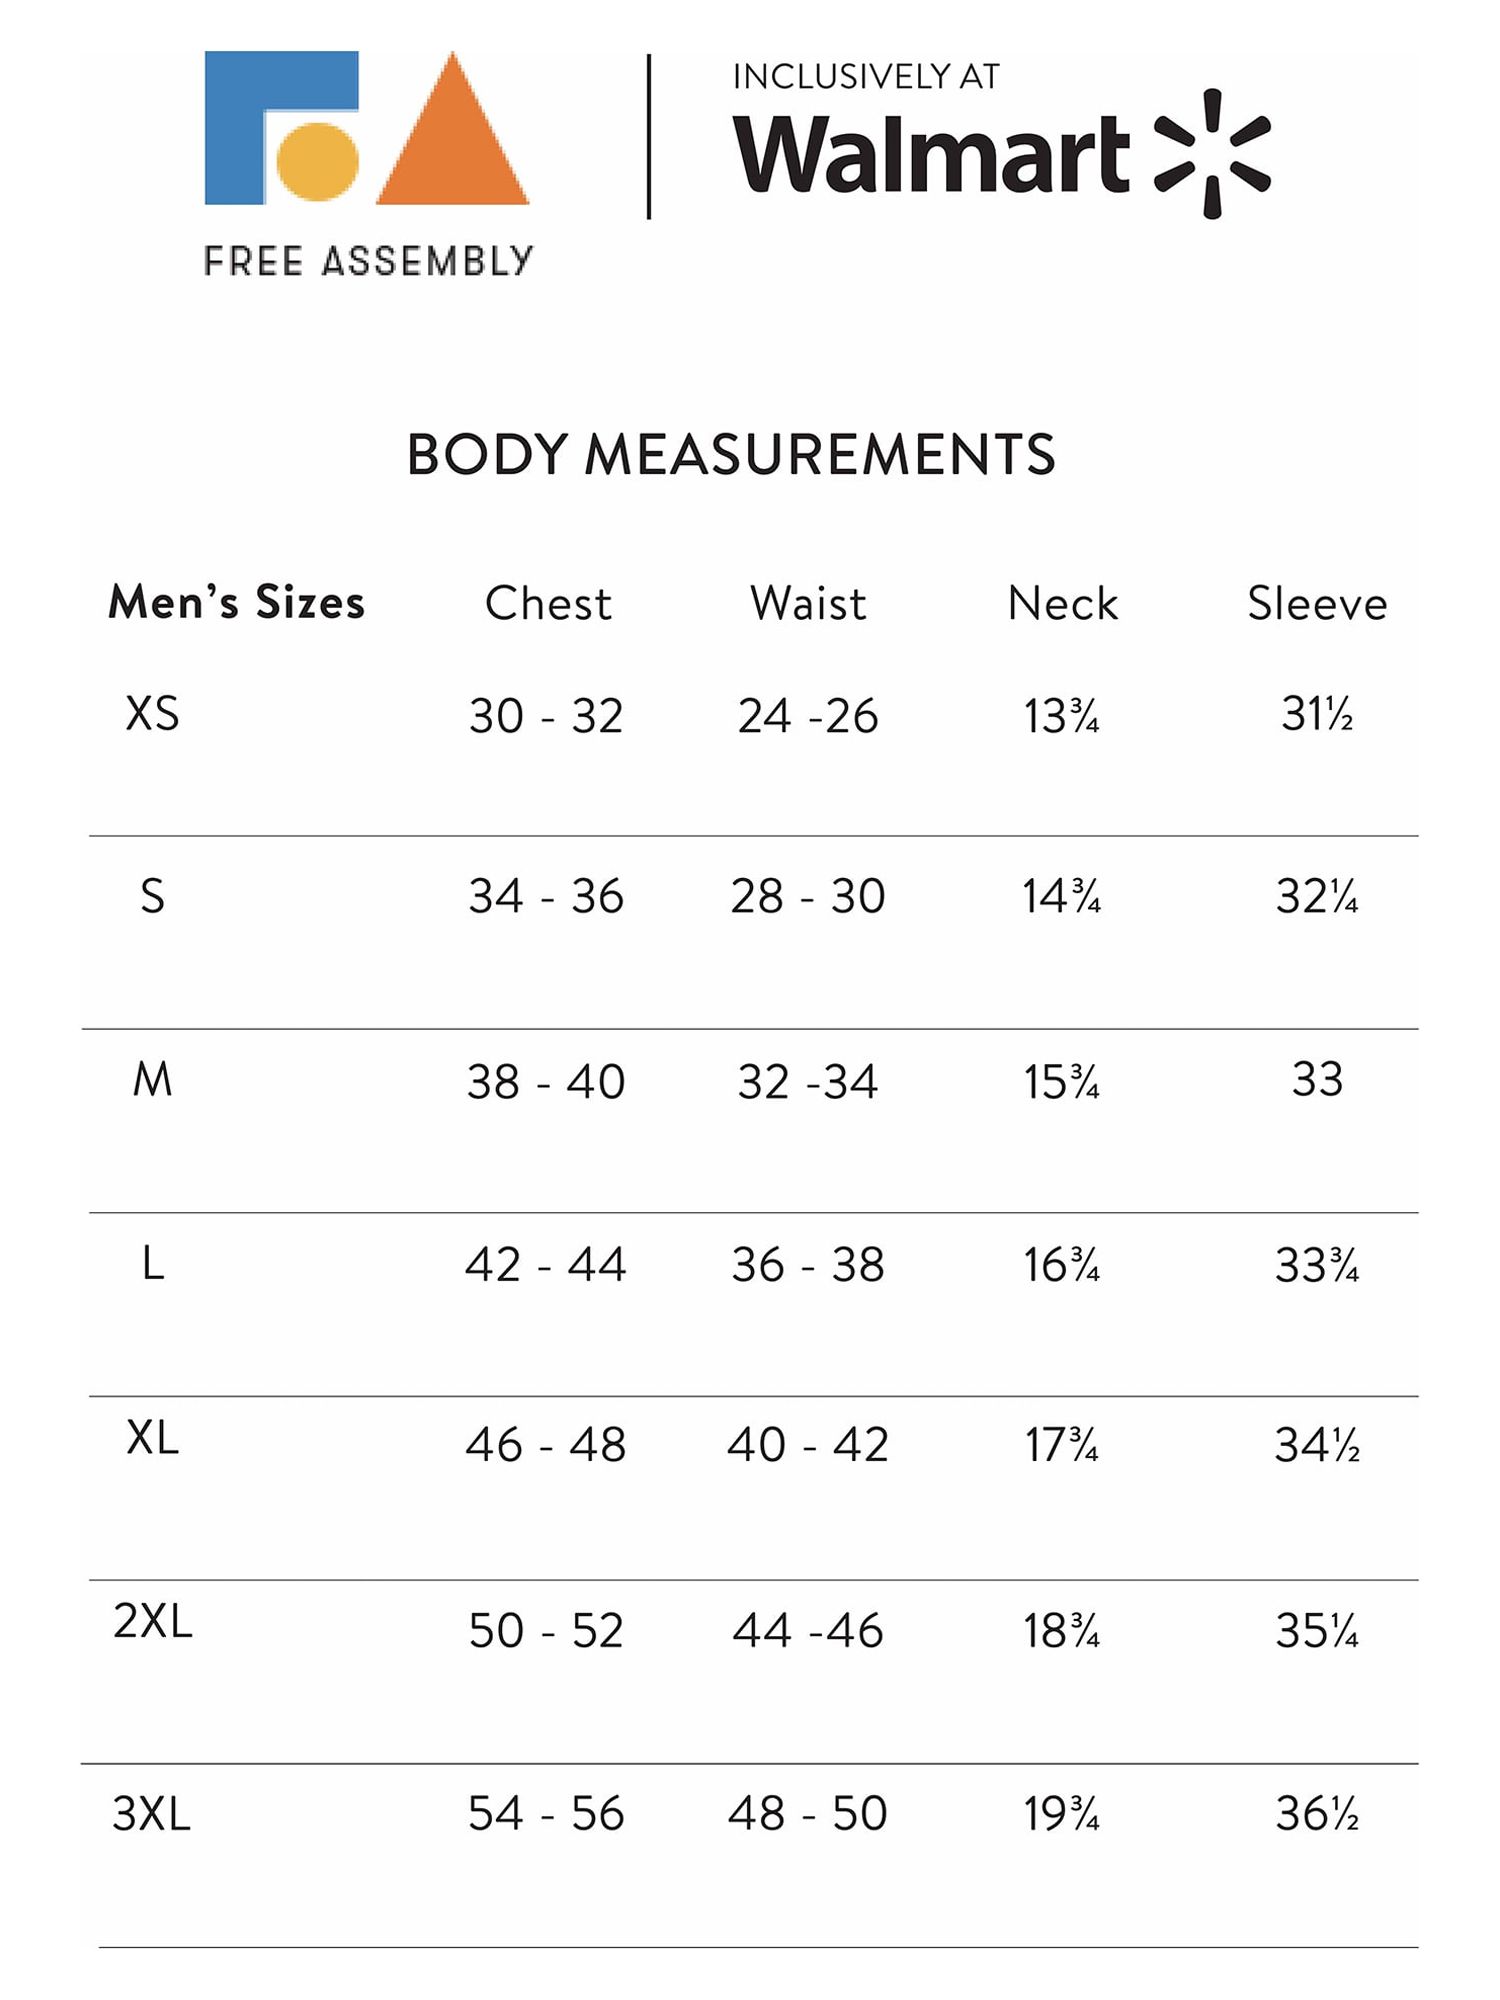 Free Assembly Men's Mid Rise Slim Jeans - image 2 of 6